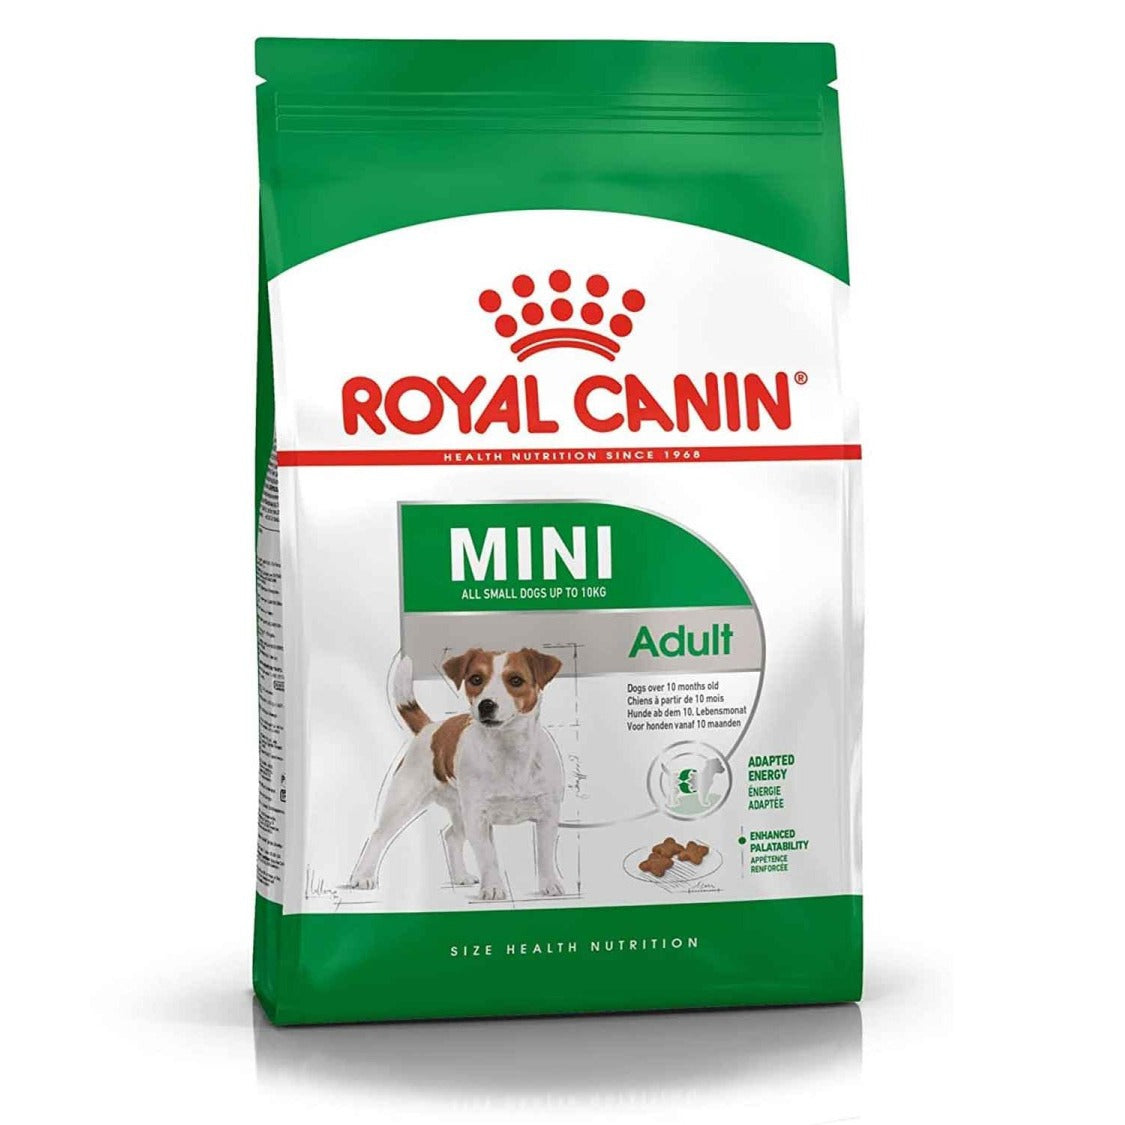 Royal Canin Mini Adult Dog Food for Small Breeds